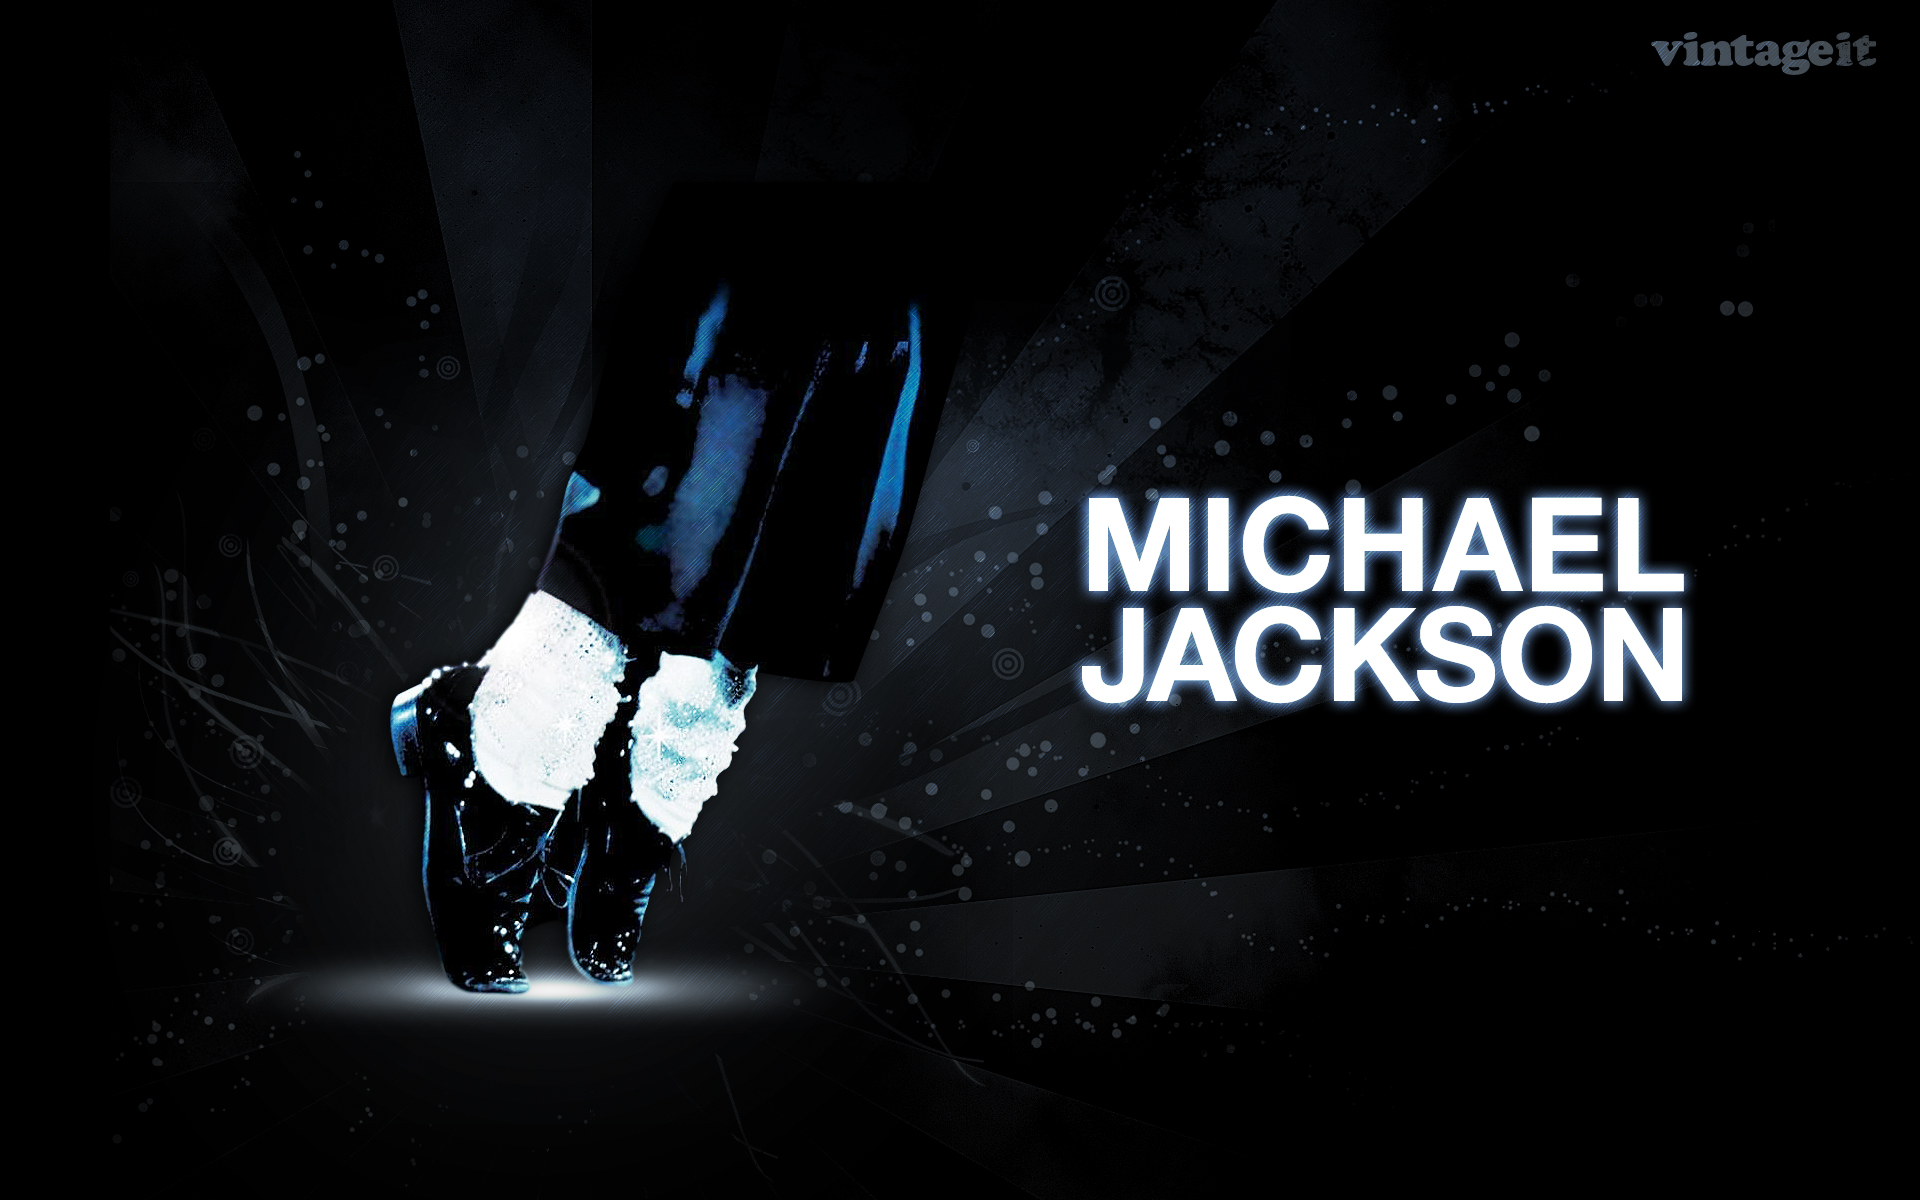 Michael Jackson Vintage Wallpaper wallpapers and images   wallpapers